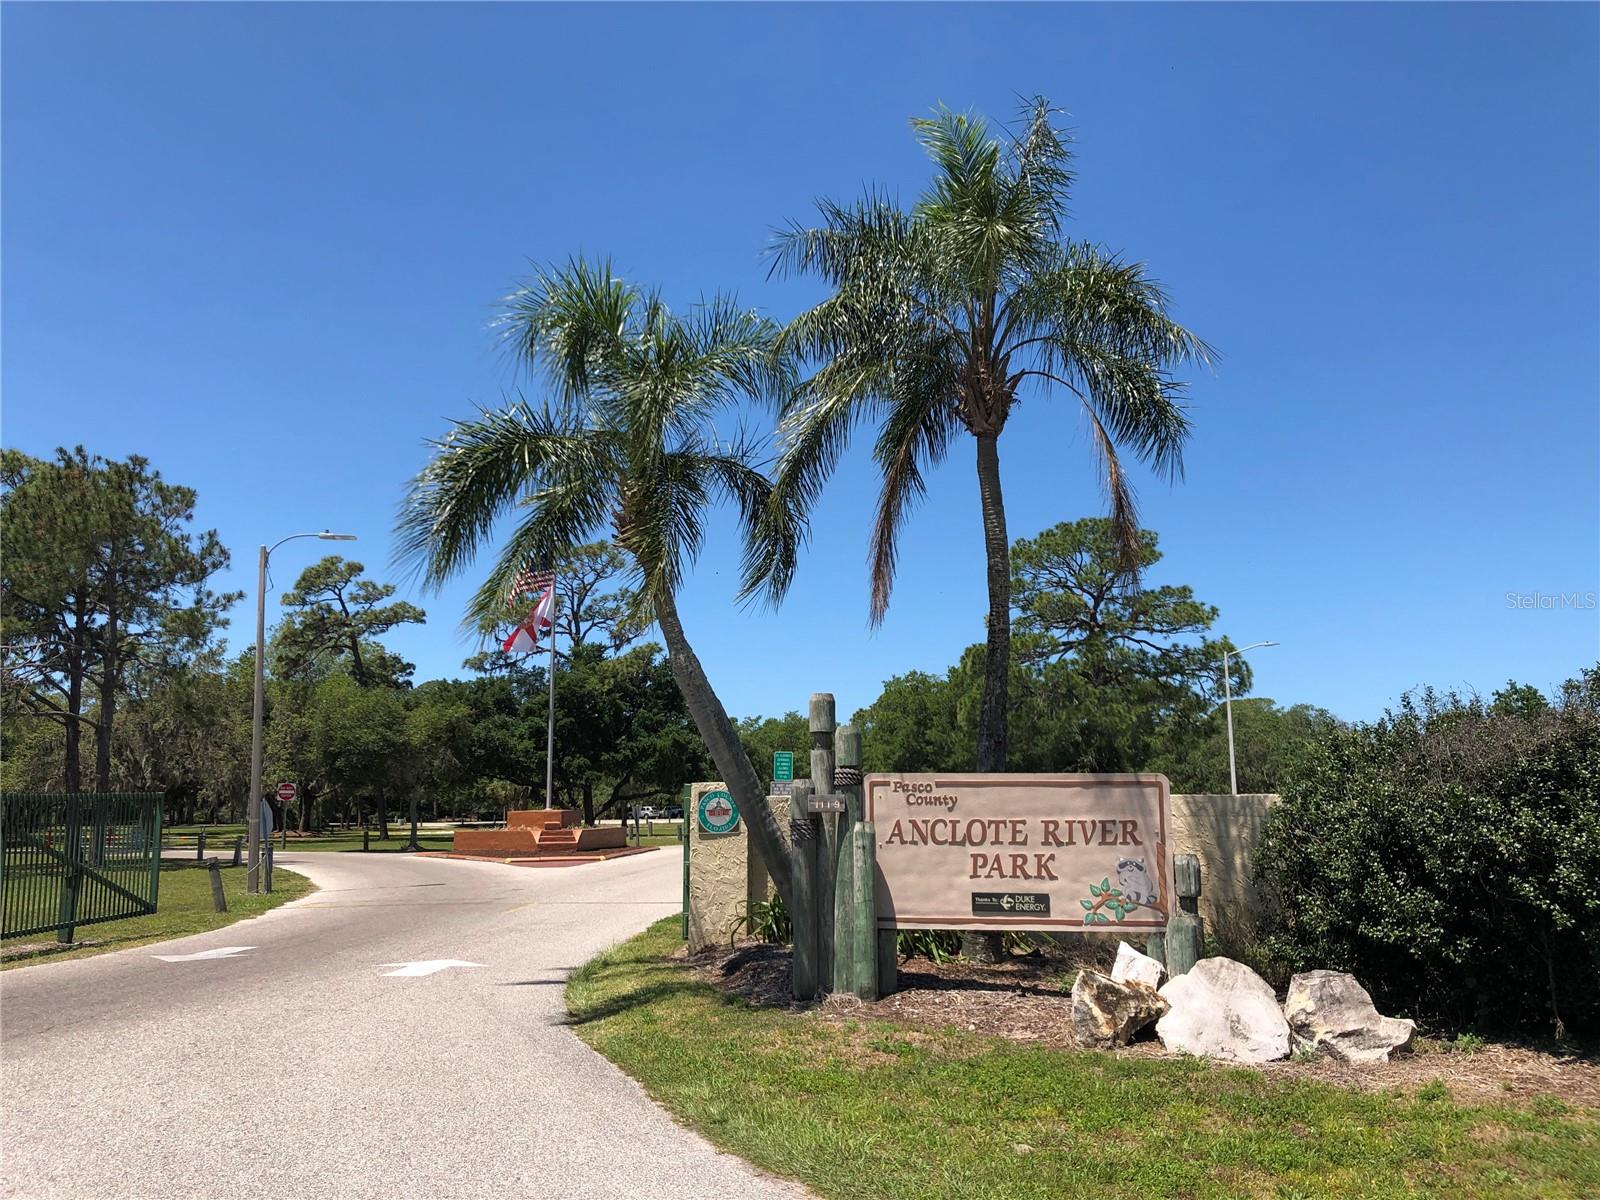 Anclote River Park- 6 miles from this condo to the River Park.